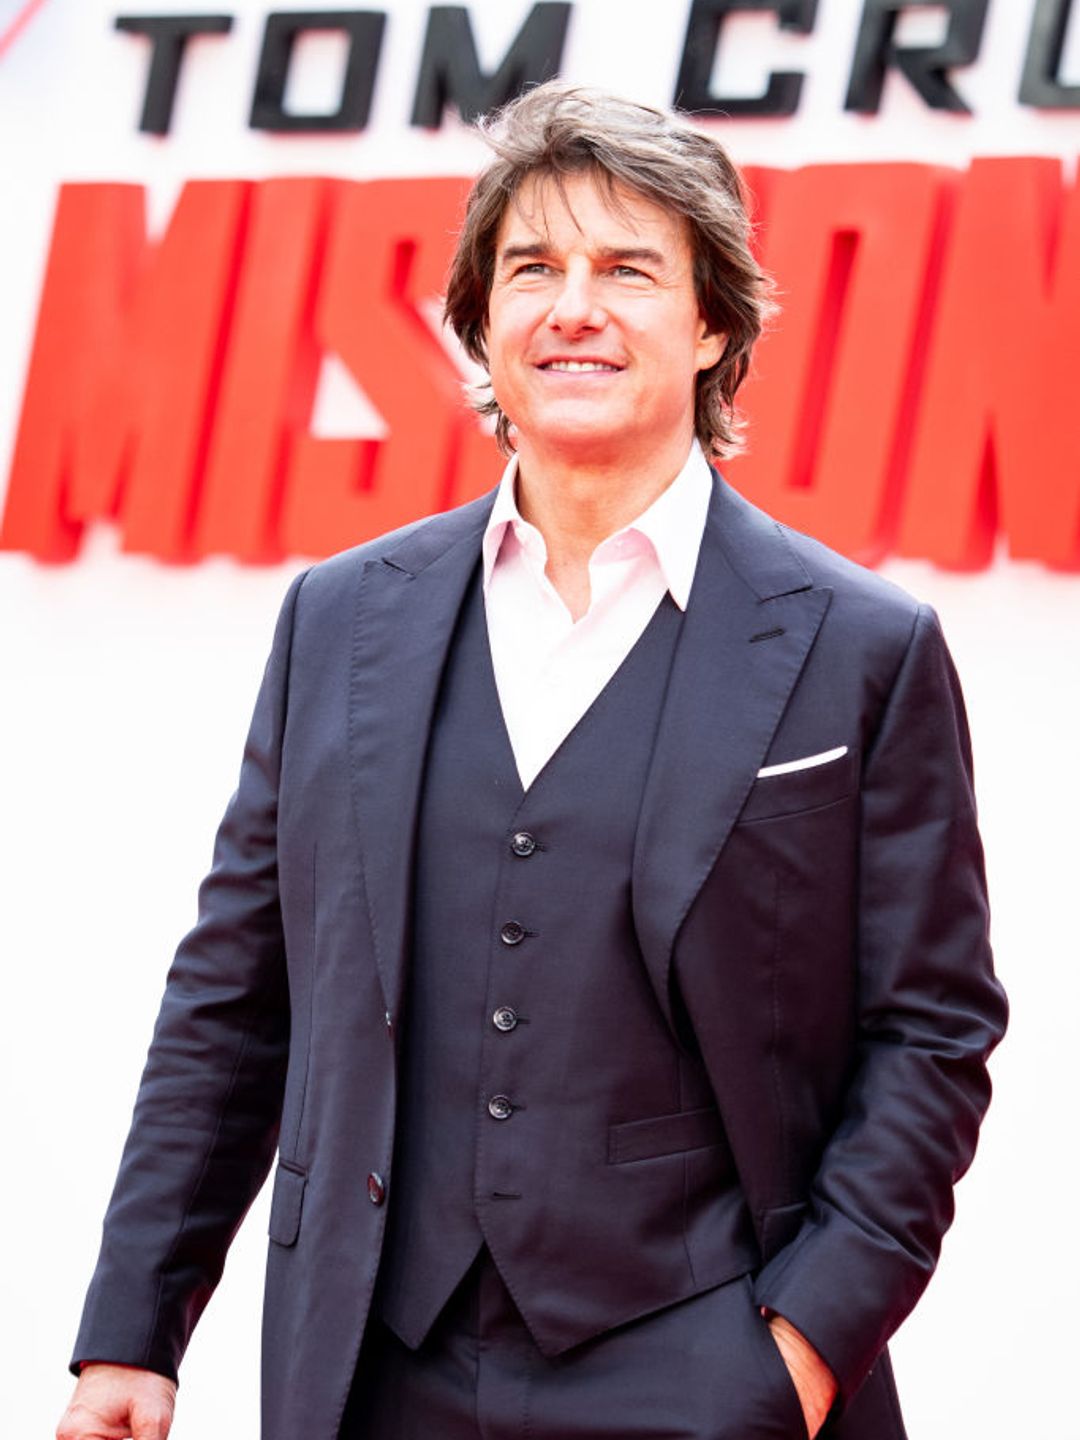 Tom Cruise smiling on the red carpet for Mission Impossible 7